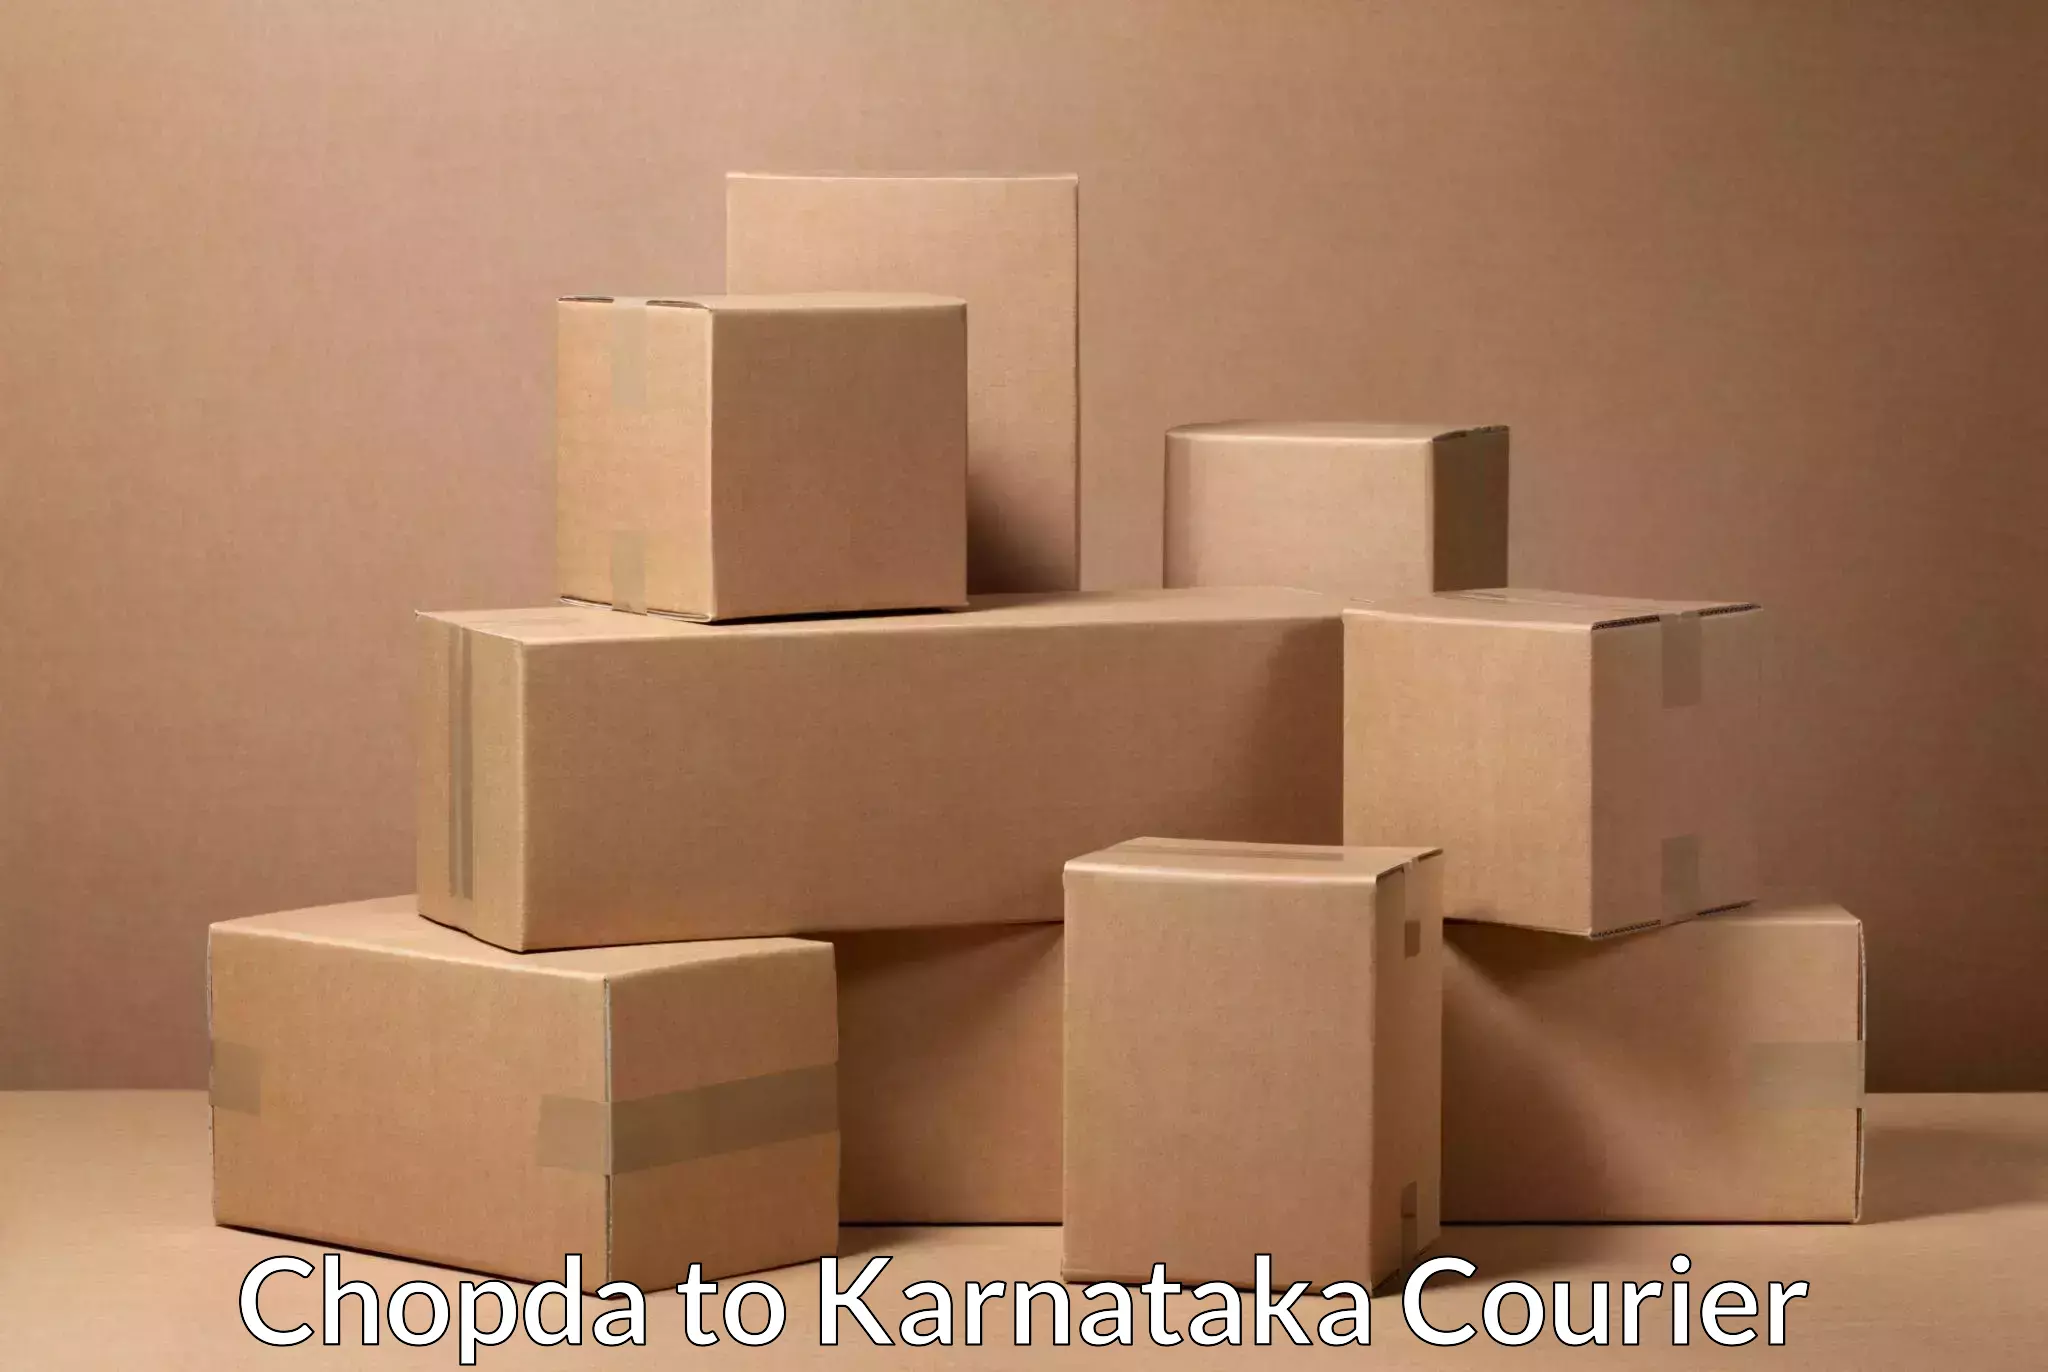 Subscription-based courier Chopda to Chikkamagalur